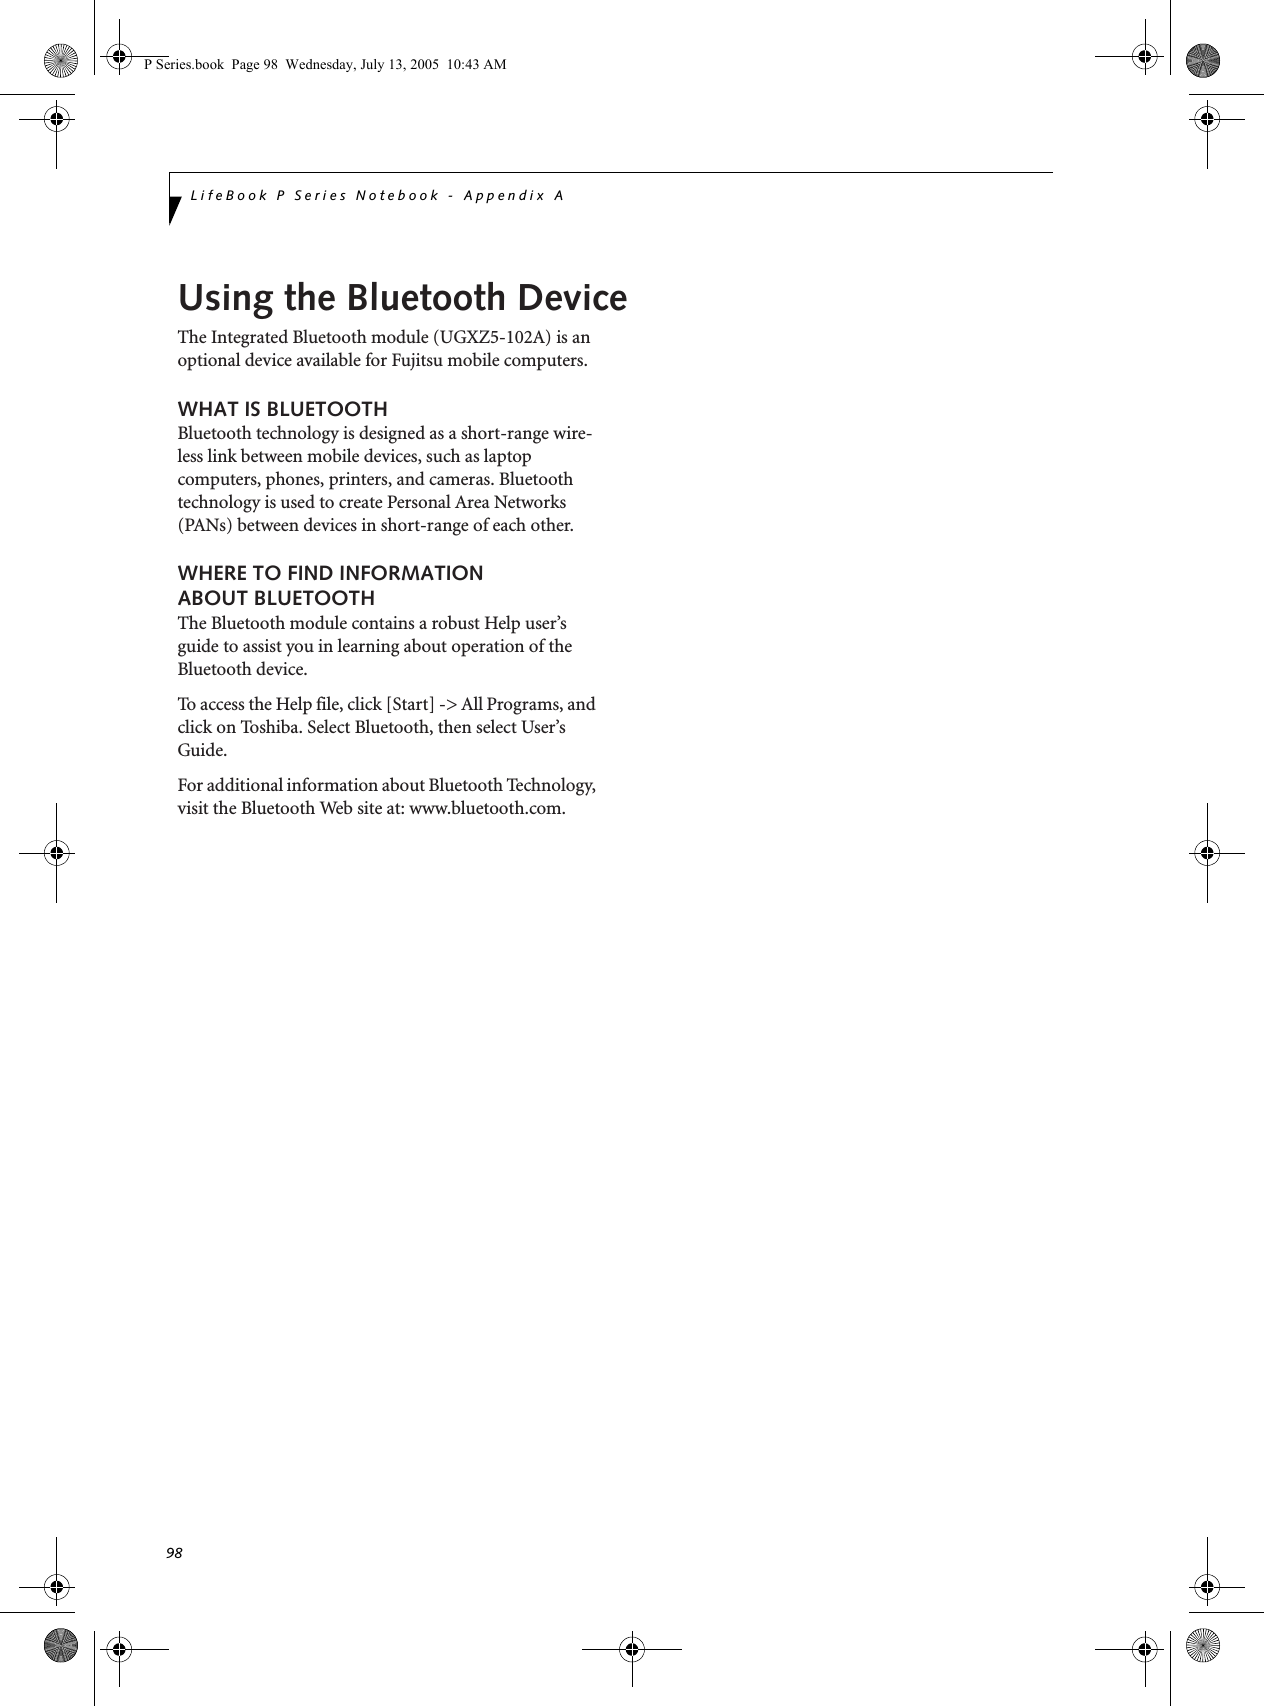 98LifeBook P Series Notebook - Appendix AP Series.book  Page 98  Wednesday, July 13, 2005  10:43 AMUsing the Bluetooth DeviceThe Integrated Bluetooth module (UGXZ5-102A) is an optional device available for Fujitsu mobile computers. WHAT IS BLUETOOTHBluetooth technology is designed as a short-range wire-less link between mobile devices, such as laptop computers, phones, printers, and cameras. Bluetooth technology is used to create Personal Area Networks (PANs) between devices in short-range of each other. WHERE TO FIND INFORMATIONABOUT BLUETOOTHThe Bluetooth module contains a robust Help user’s guide to assist you in learning about operation of the Bluetooth device.To access the Help file, click [Start] -&gt; All Programs, and click on Toshiba. Select Bluetooth, then select User’s Guide.For additional information about Bluetooth Technology, visit the Bluetooth Web site at: www.bluetooth.com.